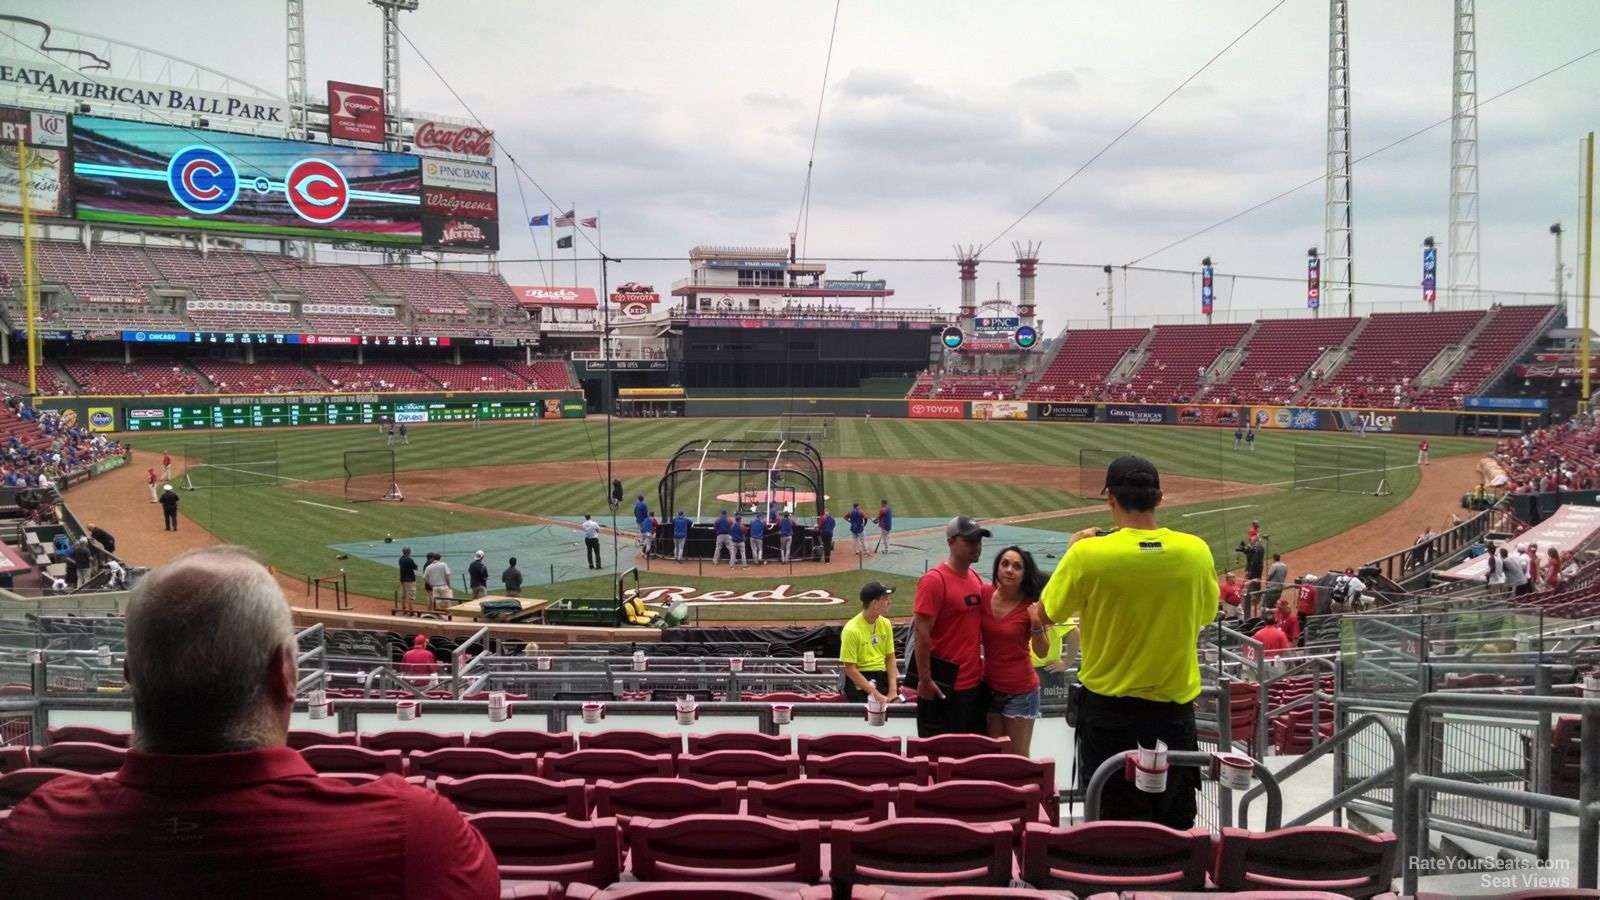 Section 123 at Great American Ball Park